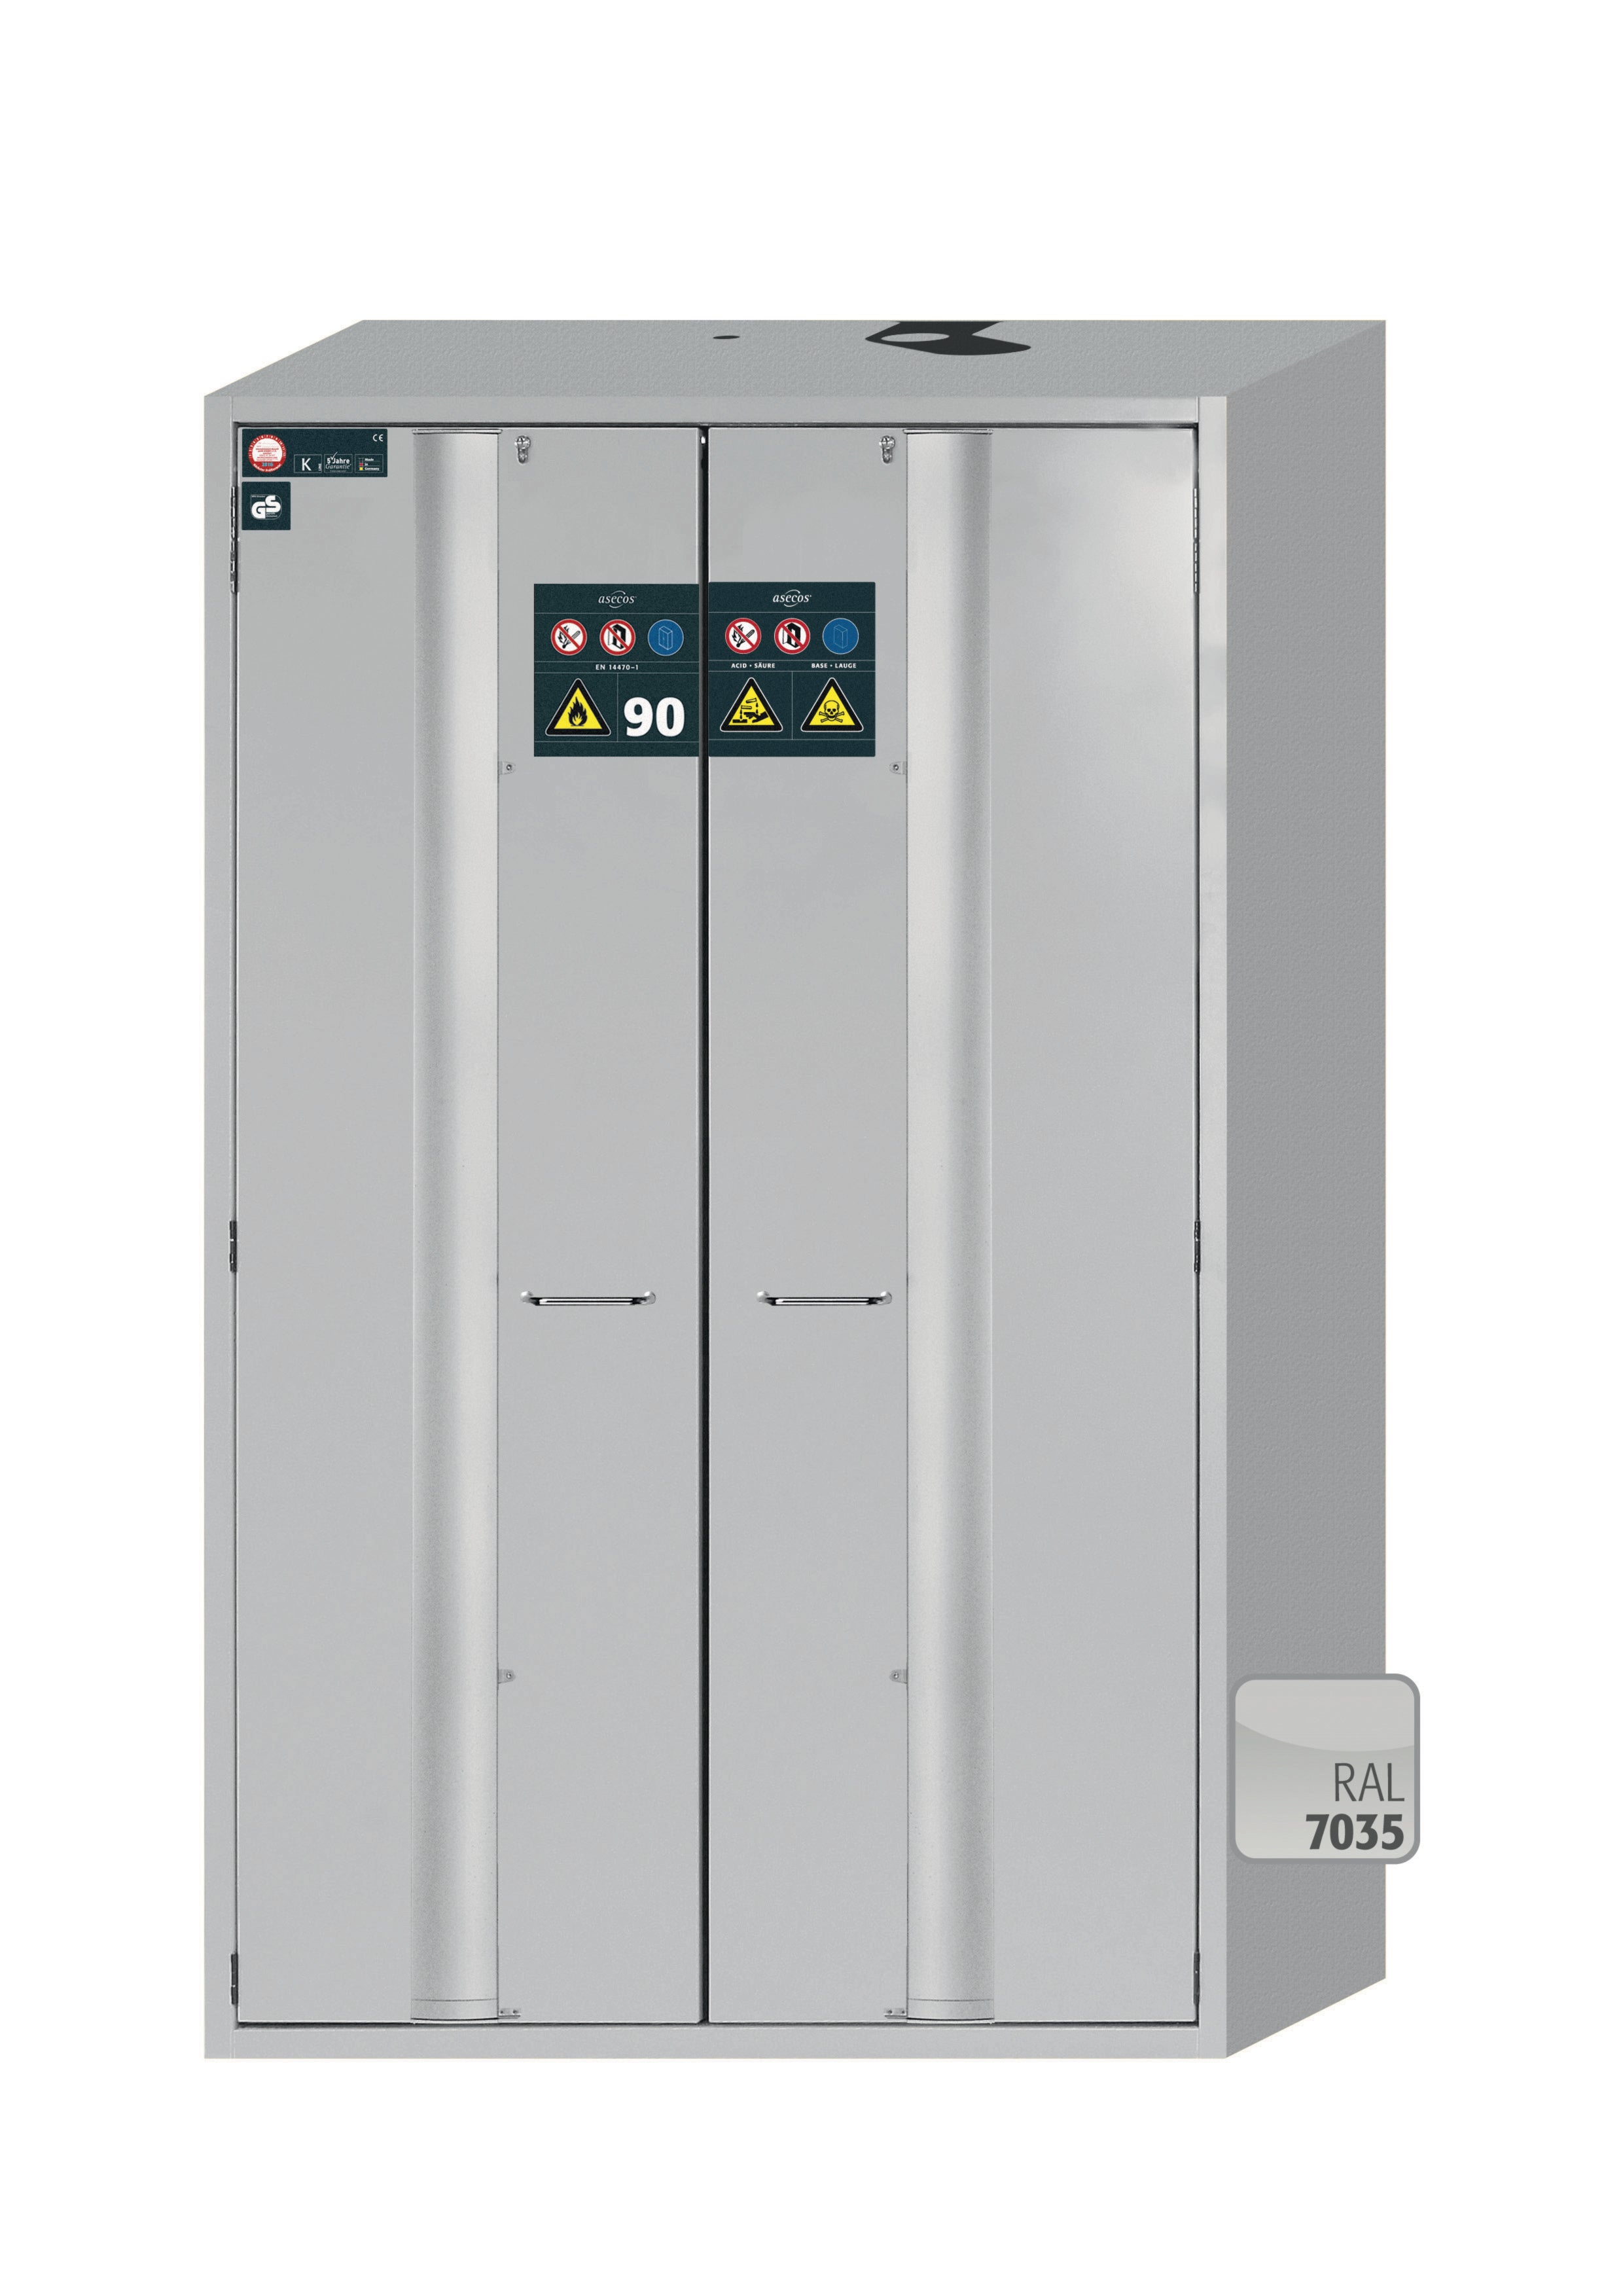 Type 90 safety cabinet S-PHOENIX-90 model S90.196.120.MV.FDAS in light gray RAL 7035 with 4x standard pull-out tray (stainless steel 1.4301)